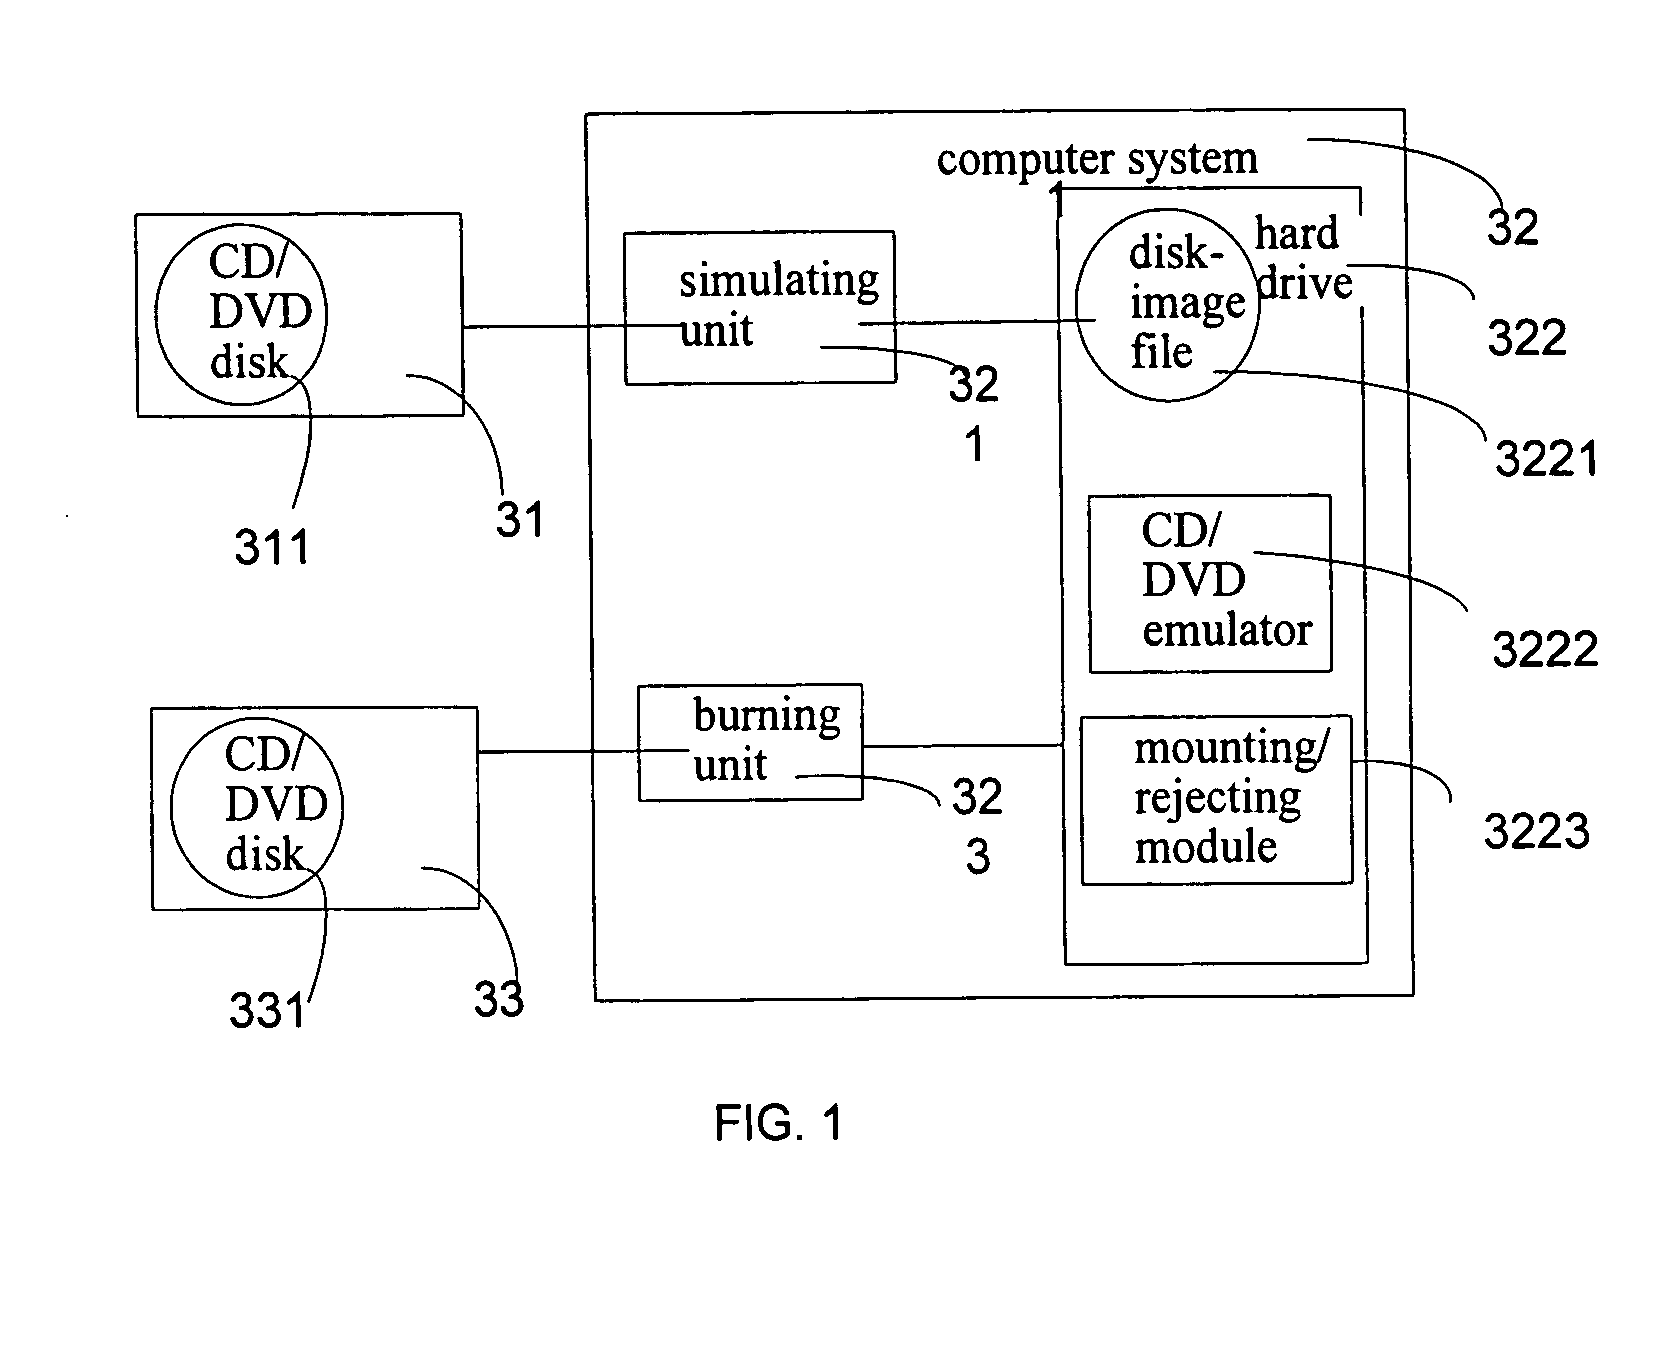 System and method for manipulating and backing up CD/DVD information